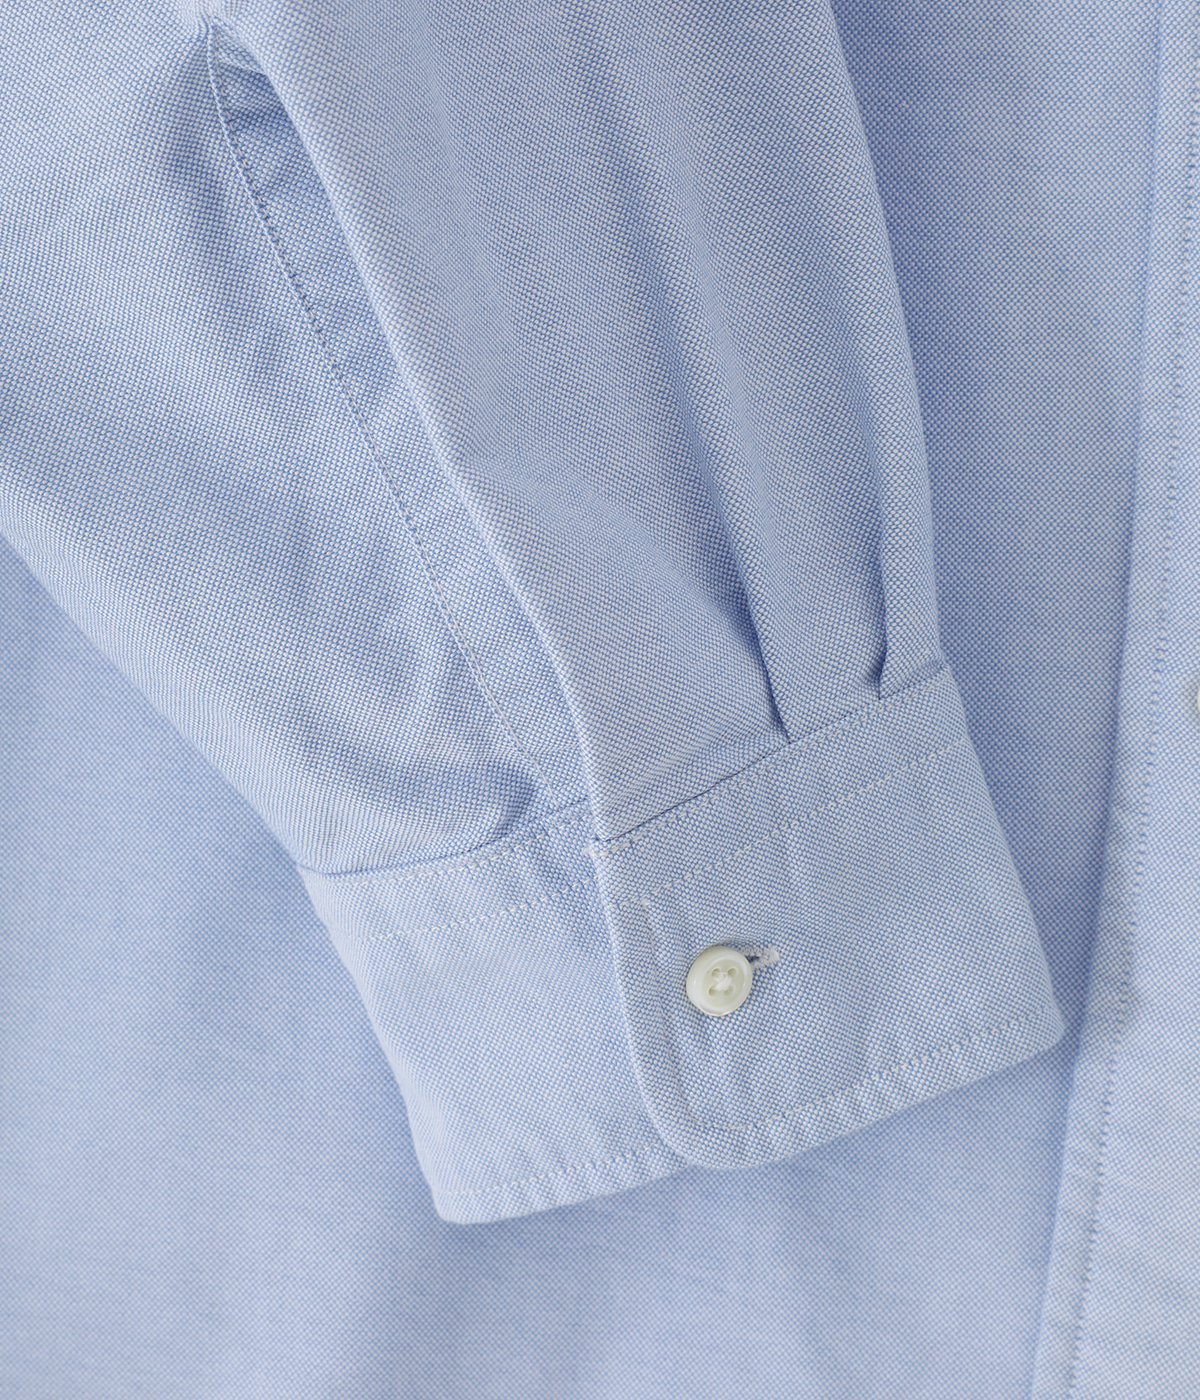 Cotton Polyester OX B.D. Shirt | THE NORTH FACE PURPLE LABEL(ザ